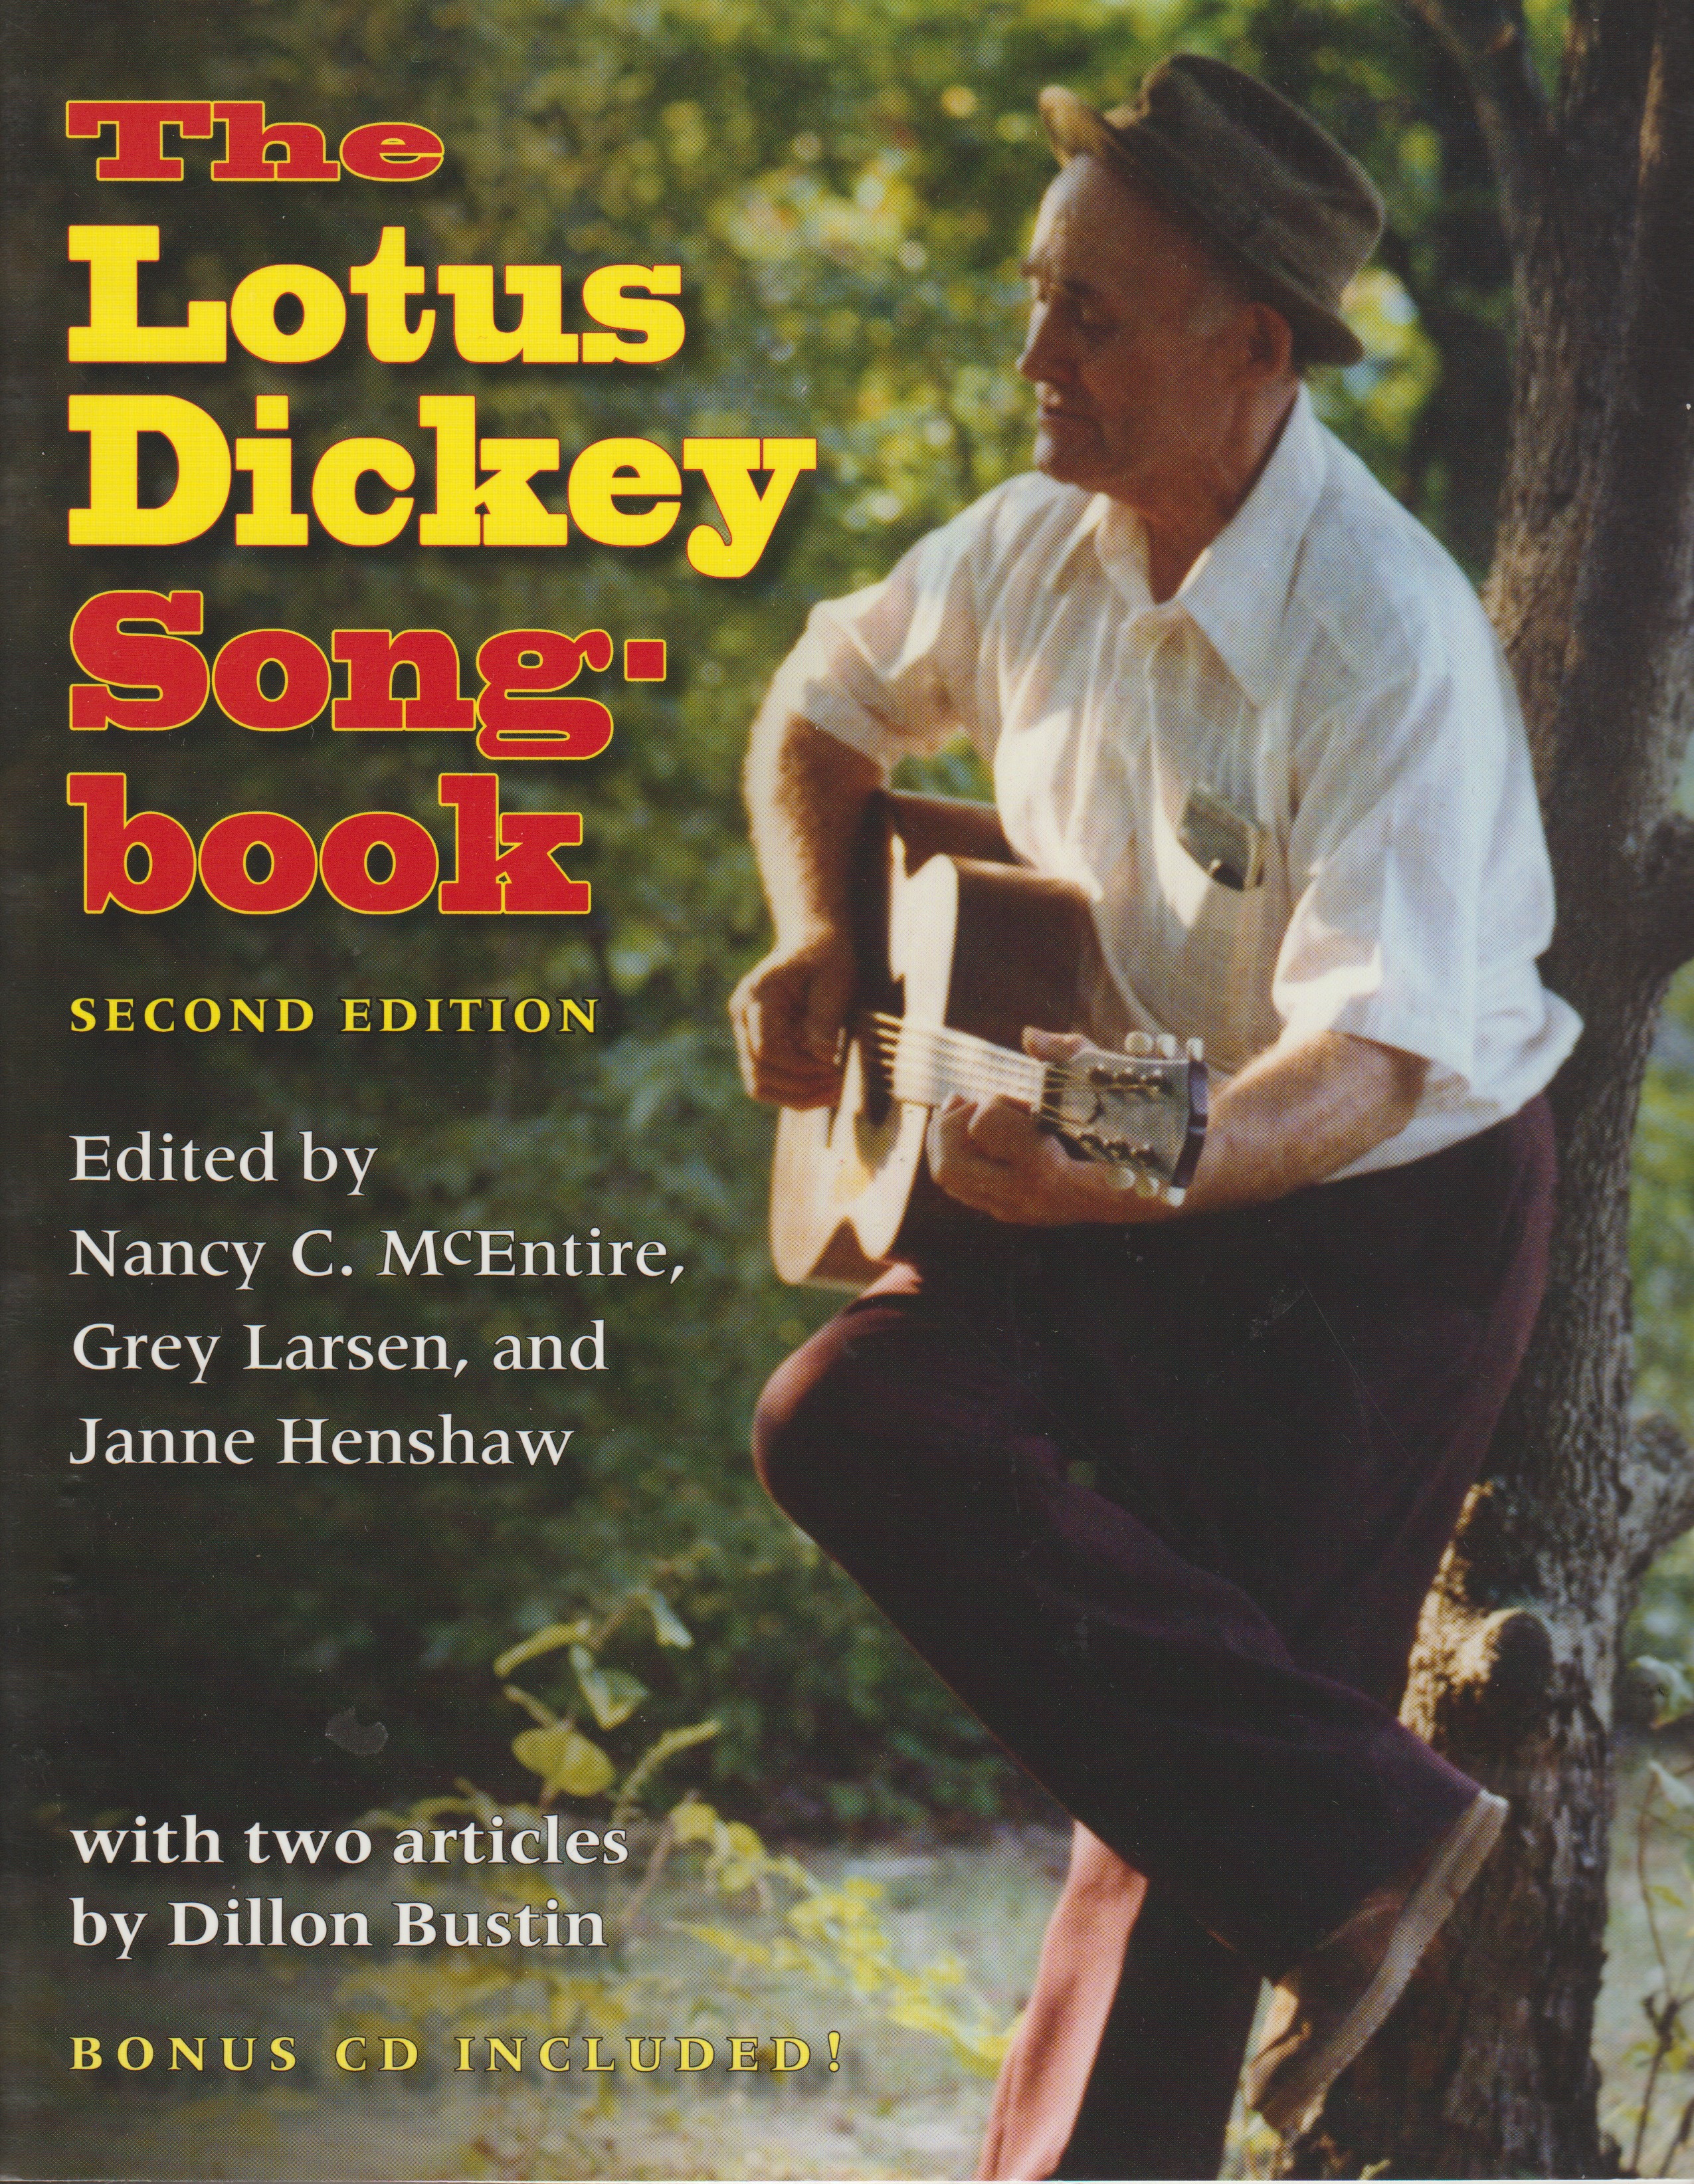 Lotus Dickey Songbook, 2nd Edition